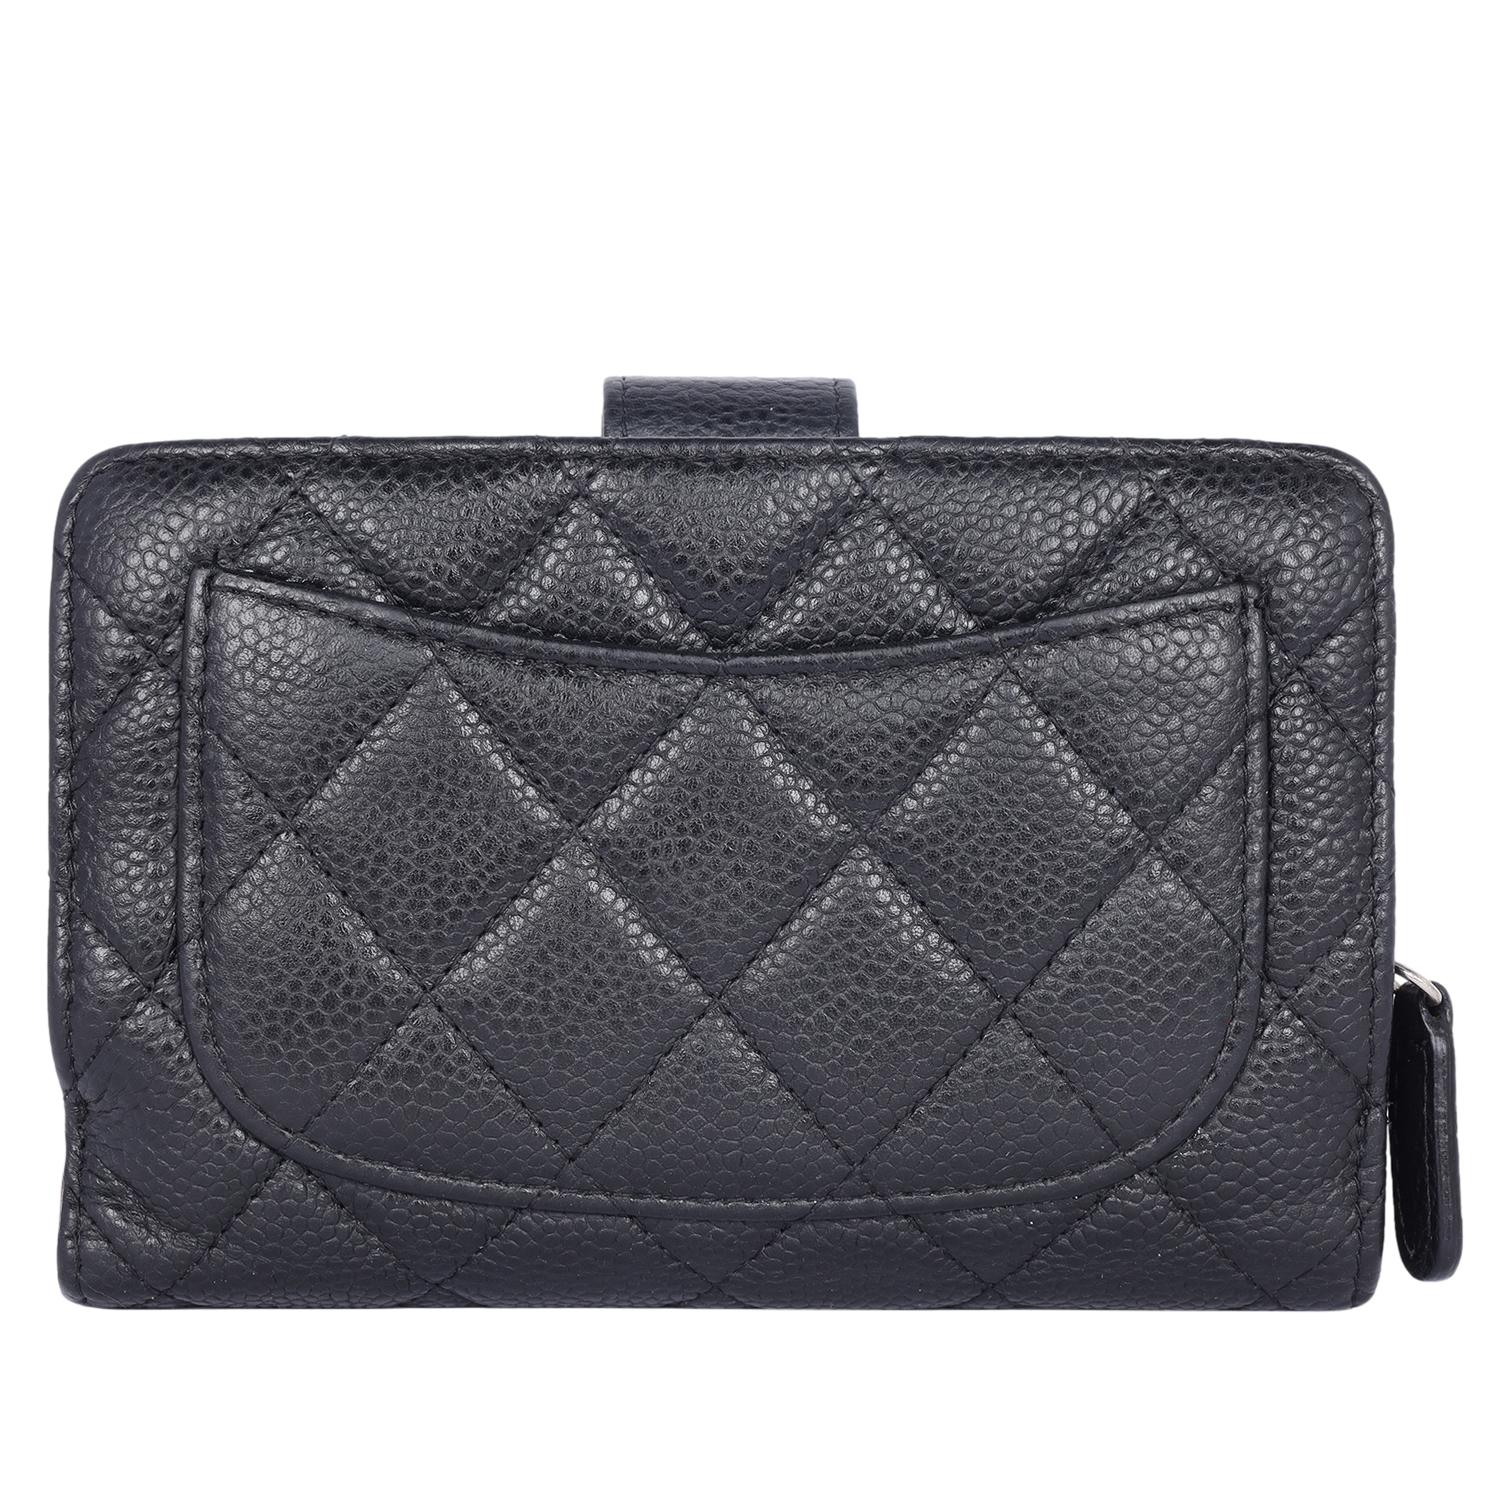 Chanel Classic Black Caviar Quilted Zipped French Wallet 2